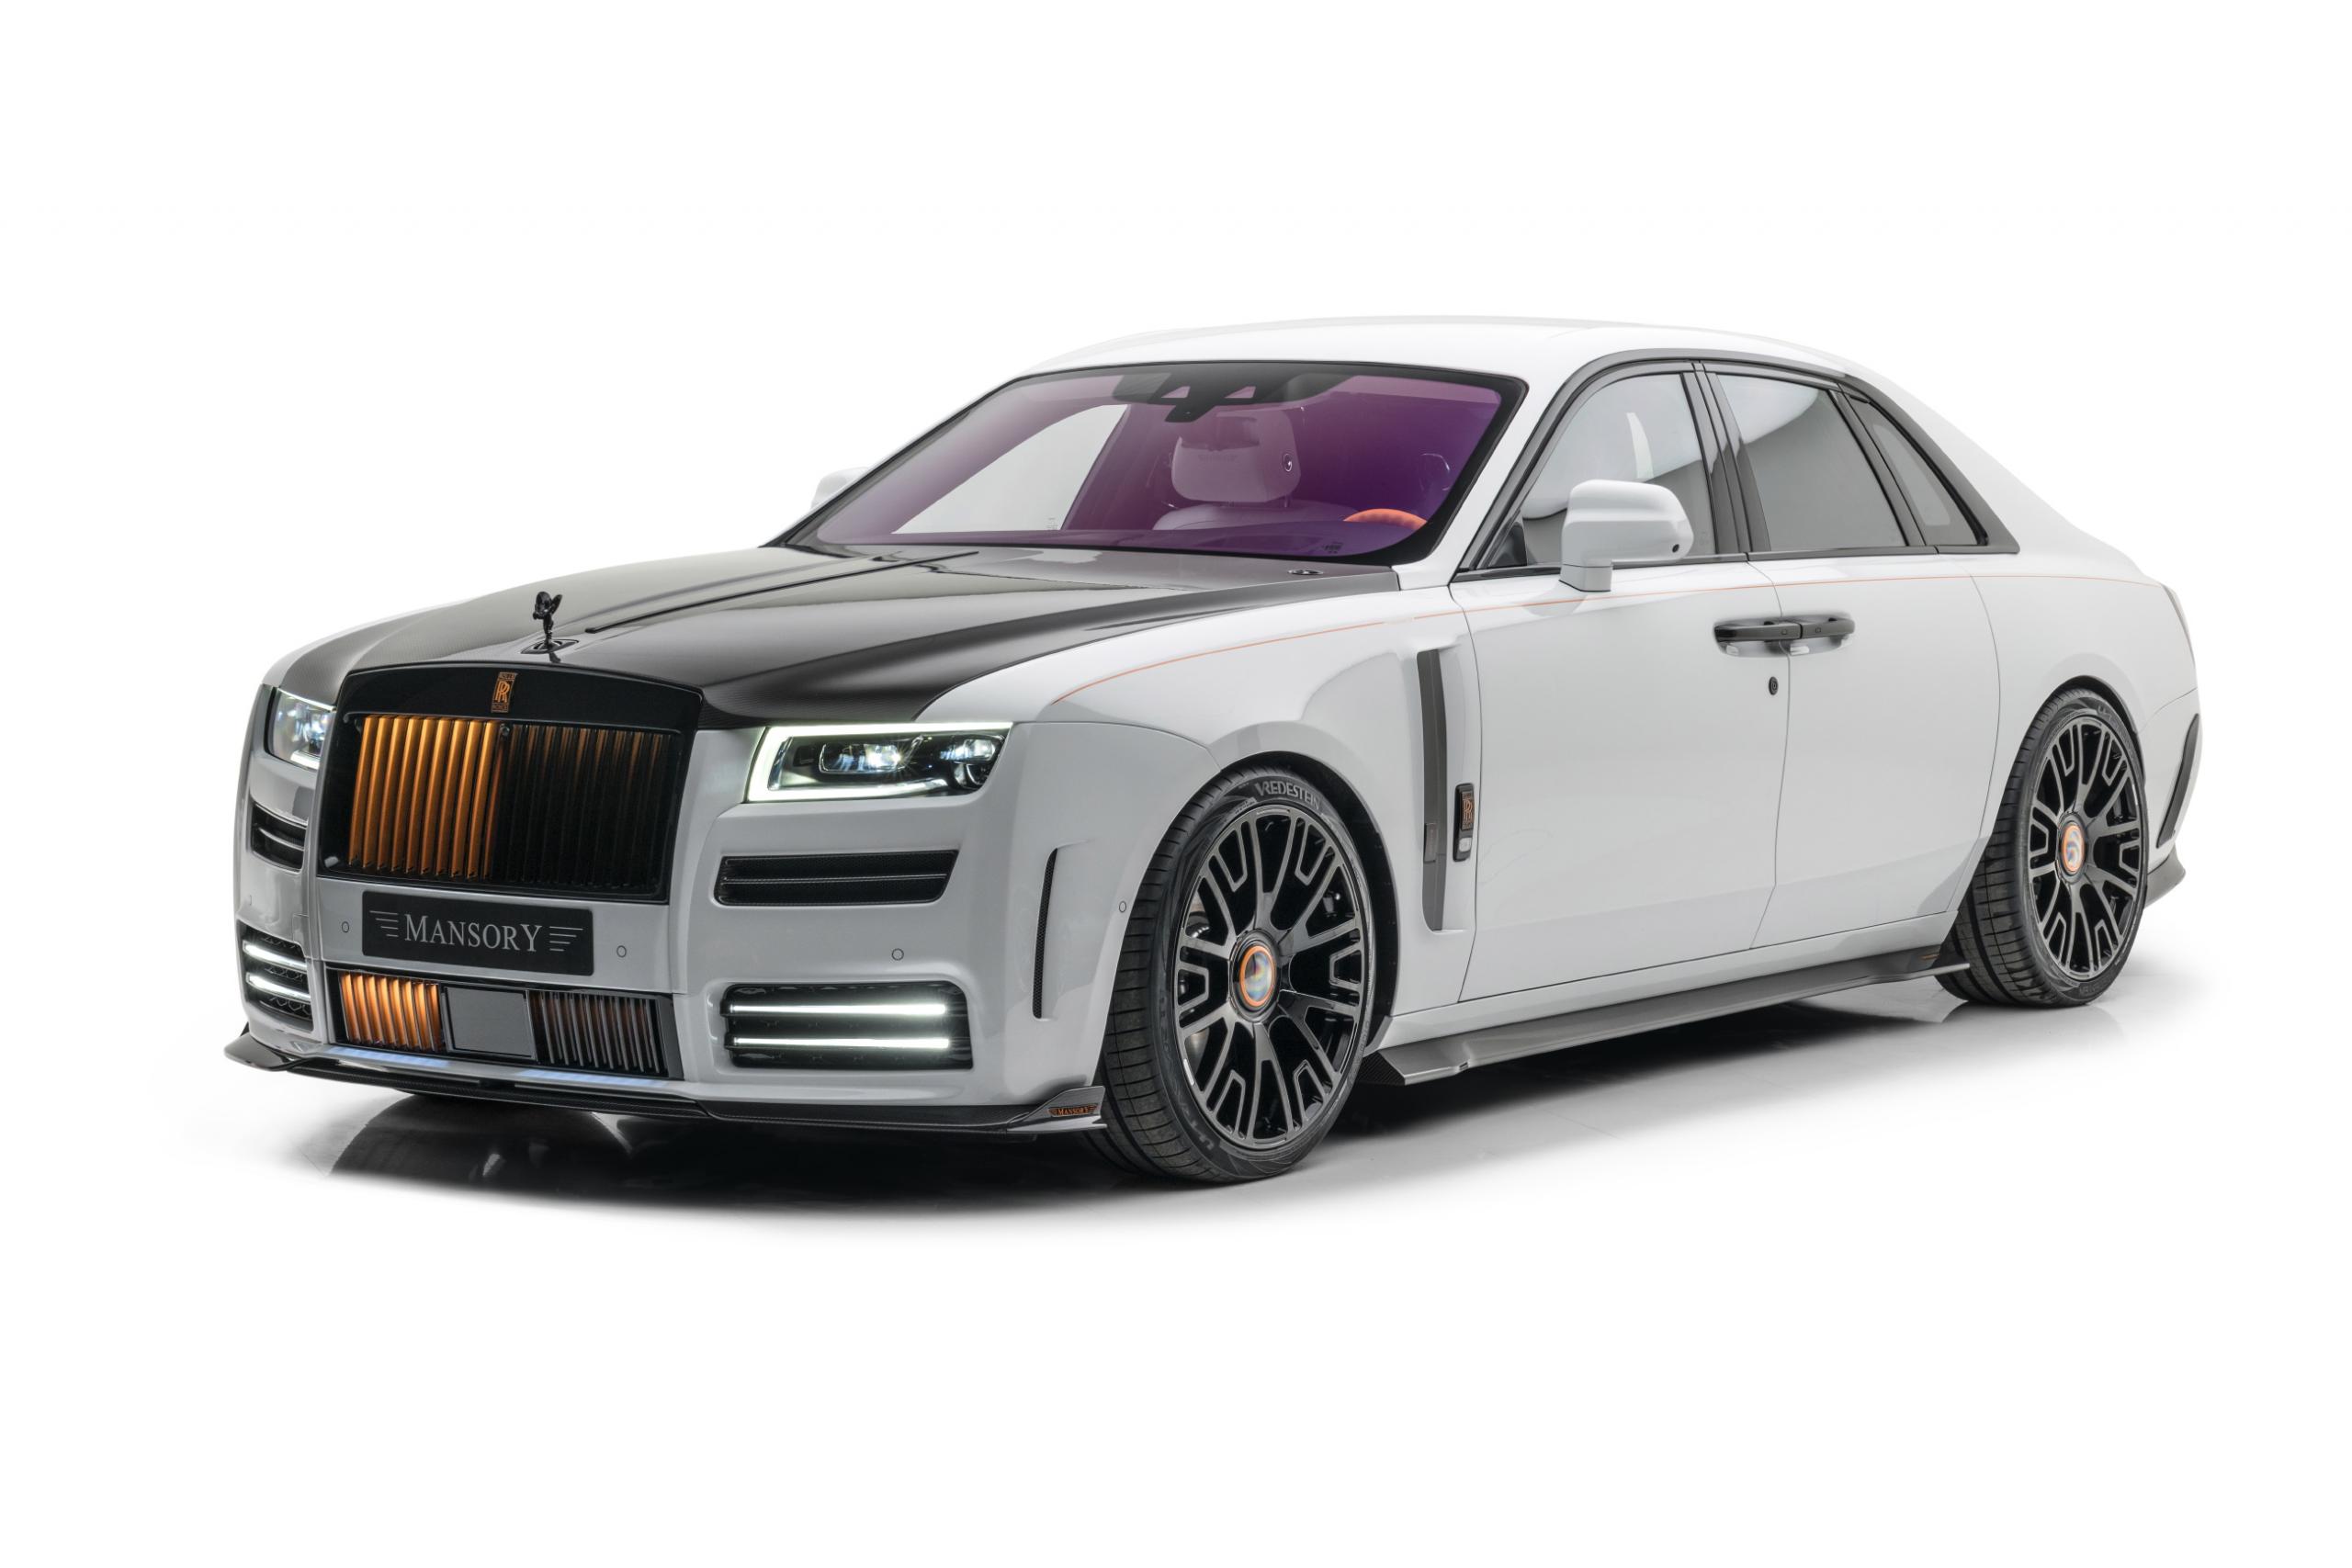 Outrageous Carbon Fiber Body Kits Unveiled For RollsRoyce Owners  CarBuzz